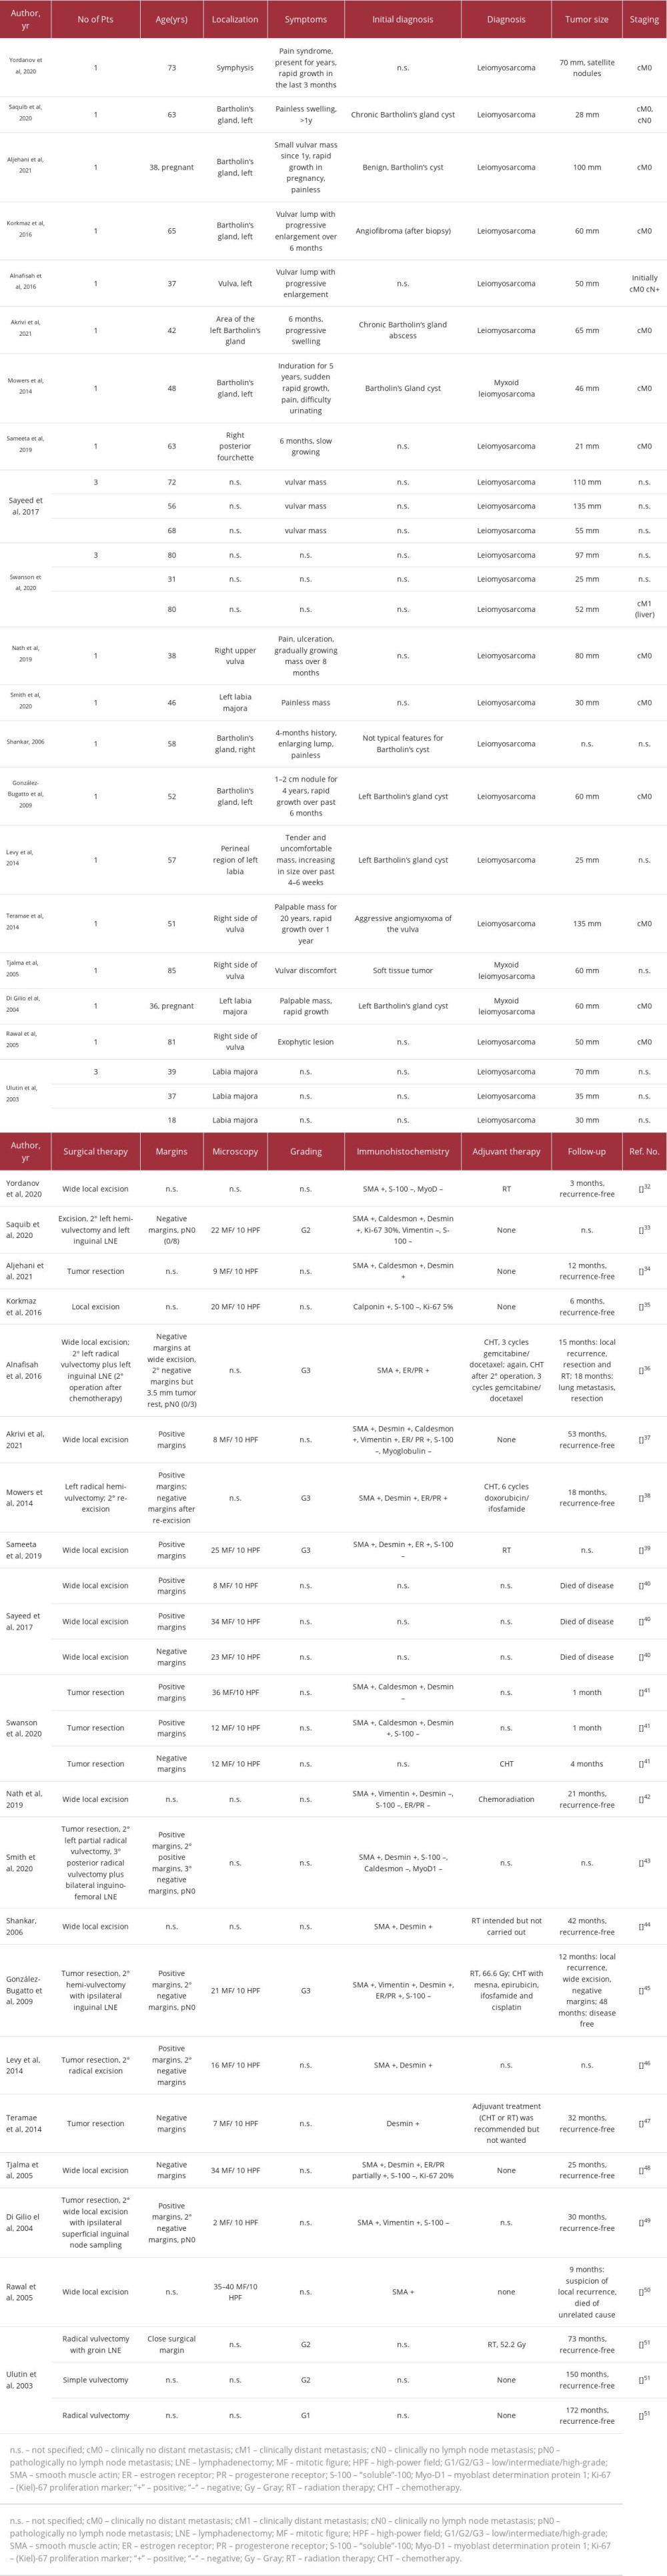 Summary of the published cases of leiomyosarcoma of the vulva and their characteristics over the past 20 years [32–51].